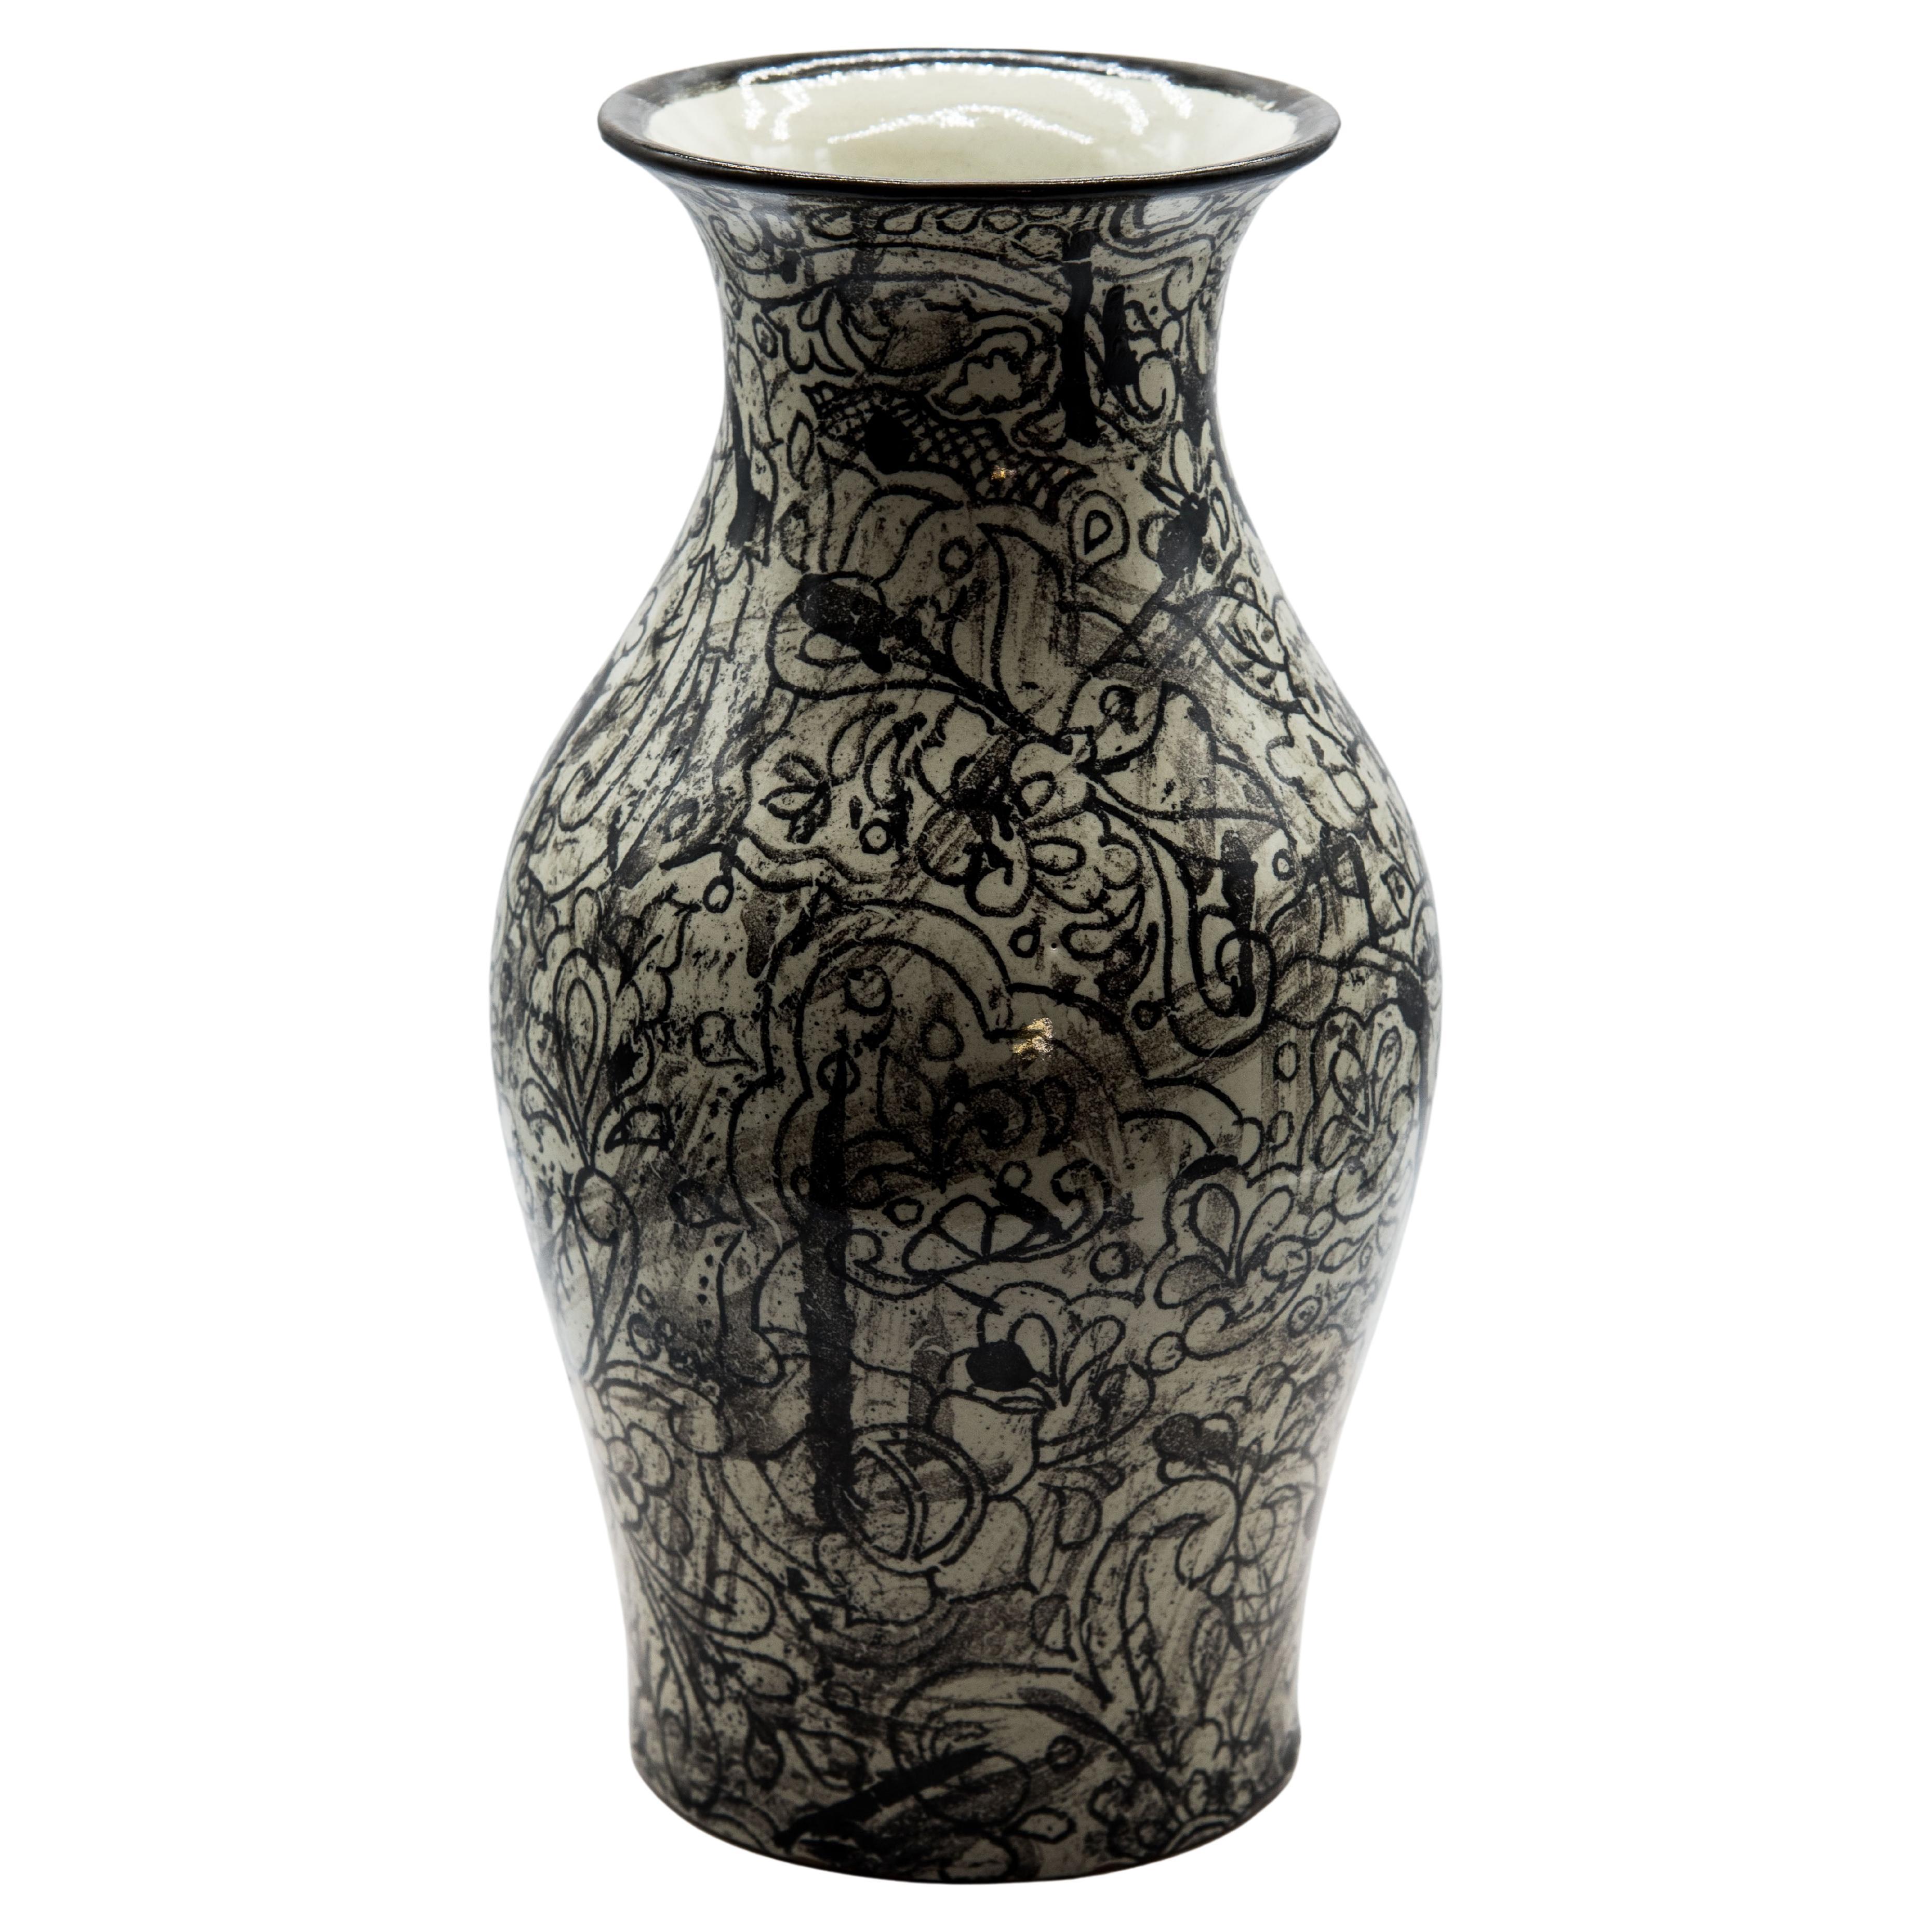 Elegant black and white jar made with the authentic Talavera technique. Master artisan, Cesar Torres portraits the colonial art of Mexico while creating a contemporary abstract design for the vessel. 

The Talavera is not just a simple painted